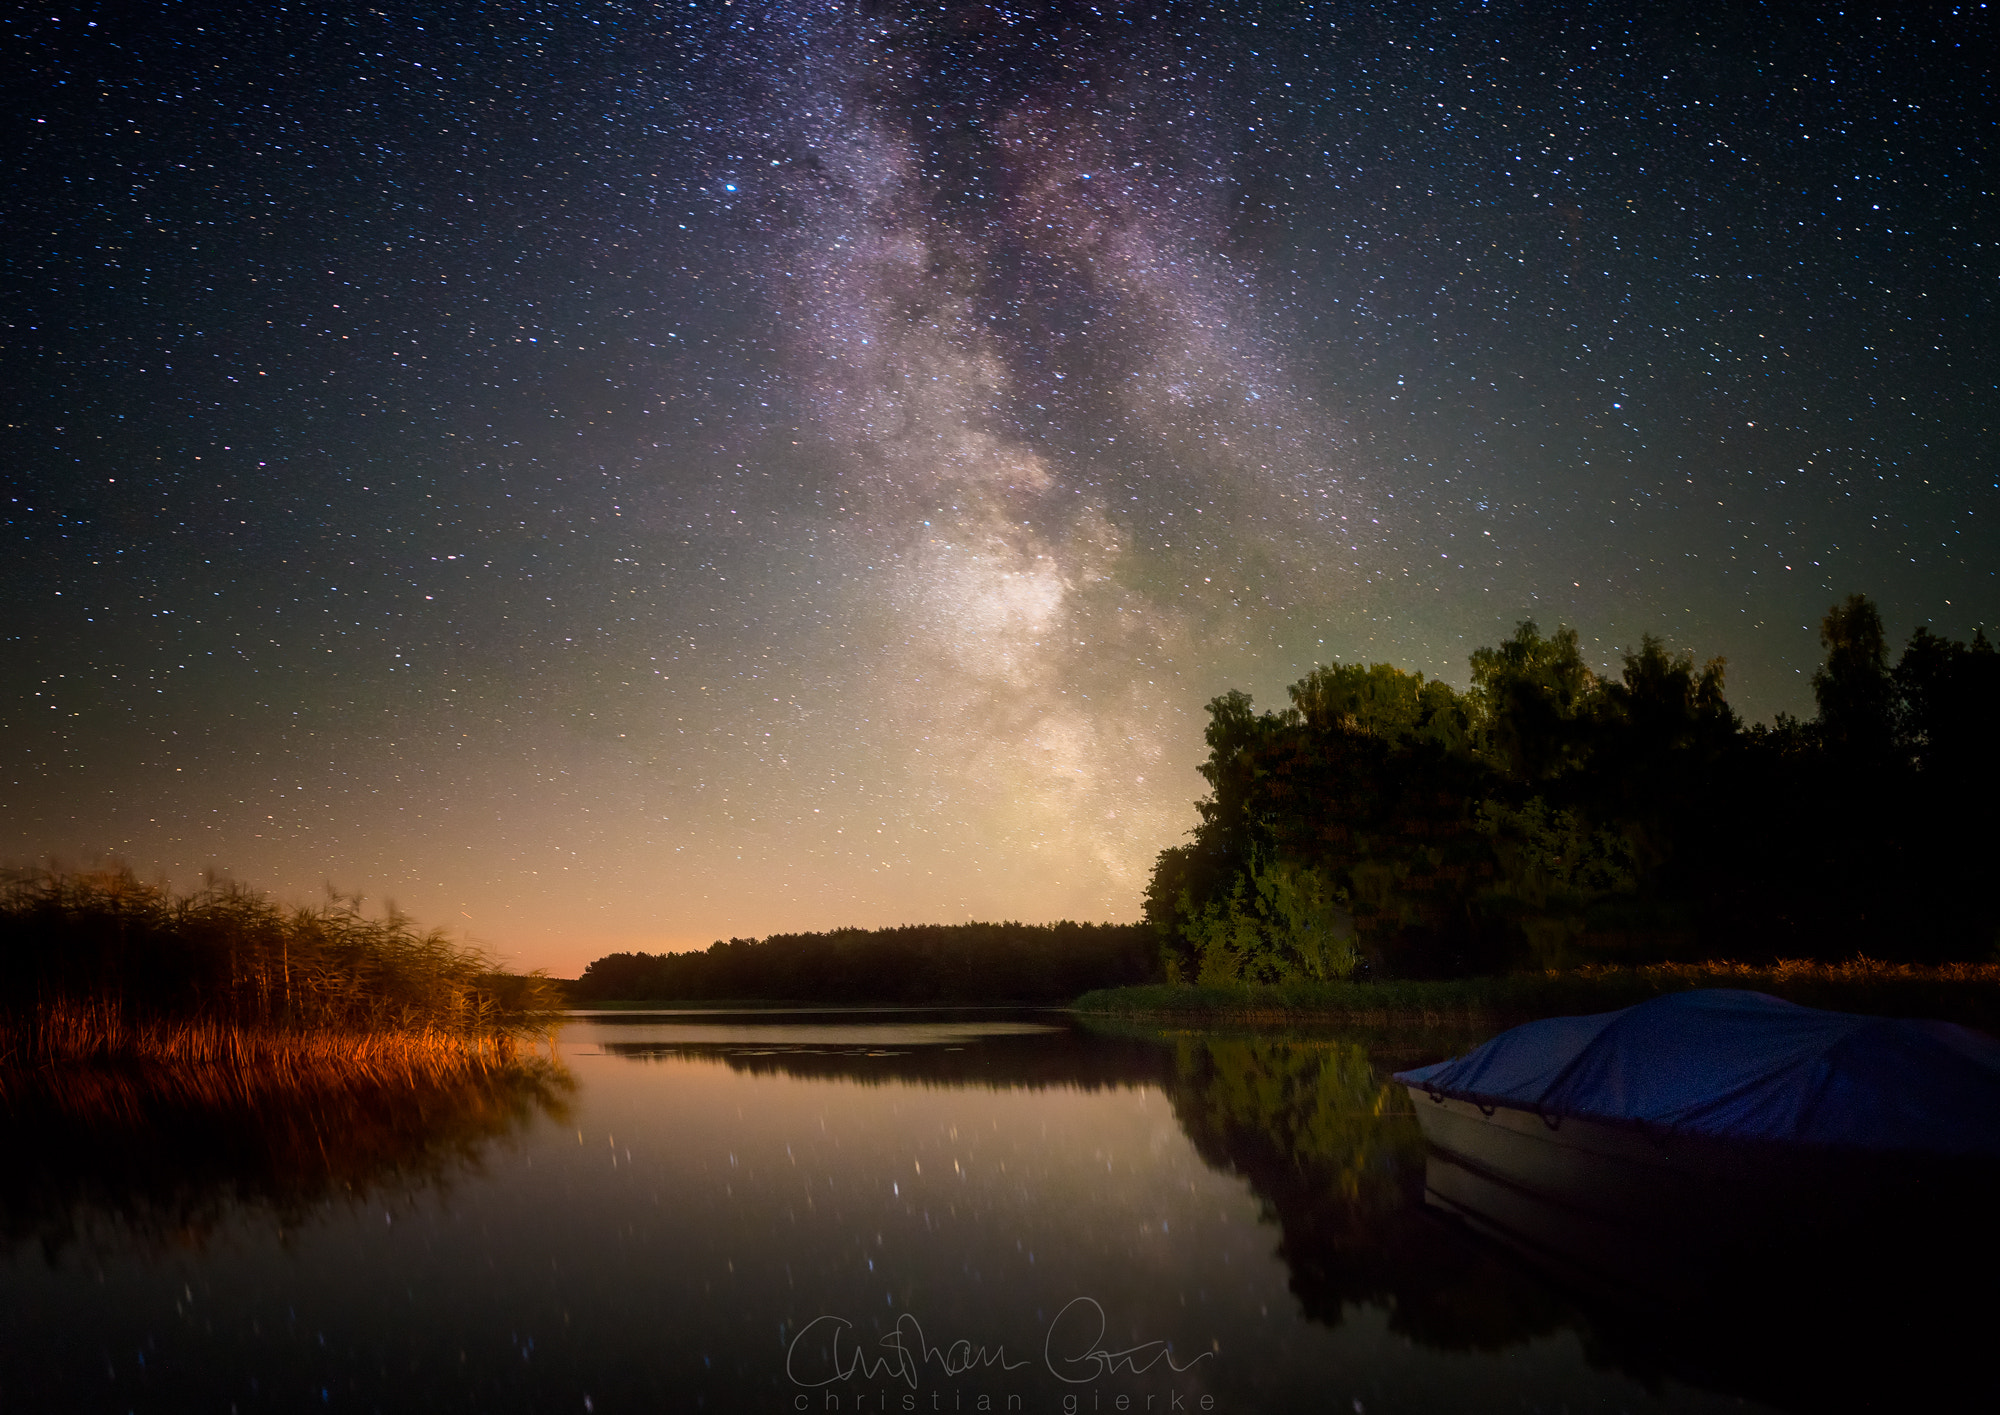 Sony a7 sample photo. The boat and the milkyway photography